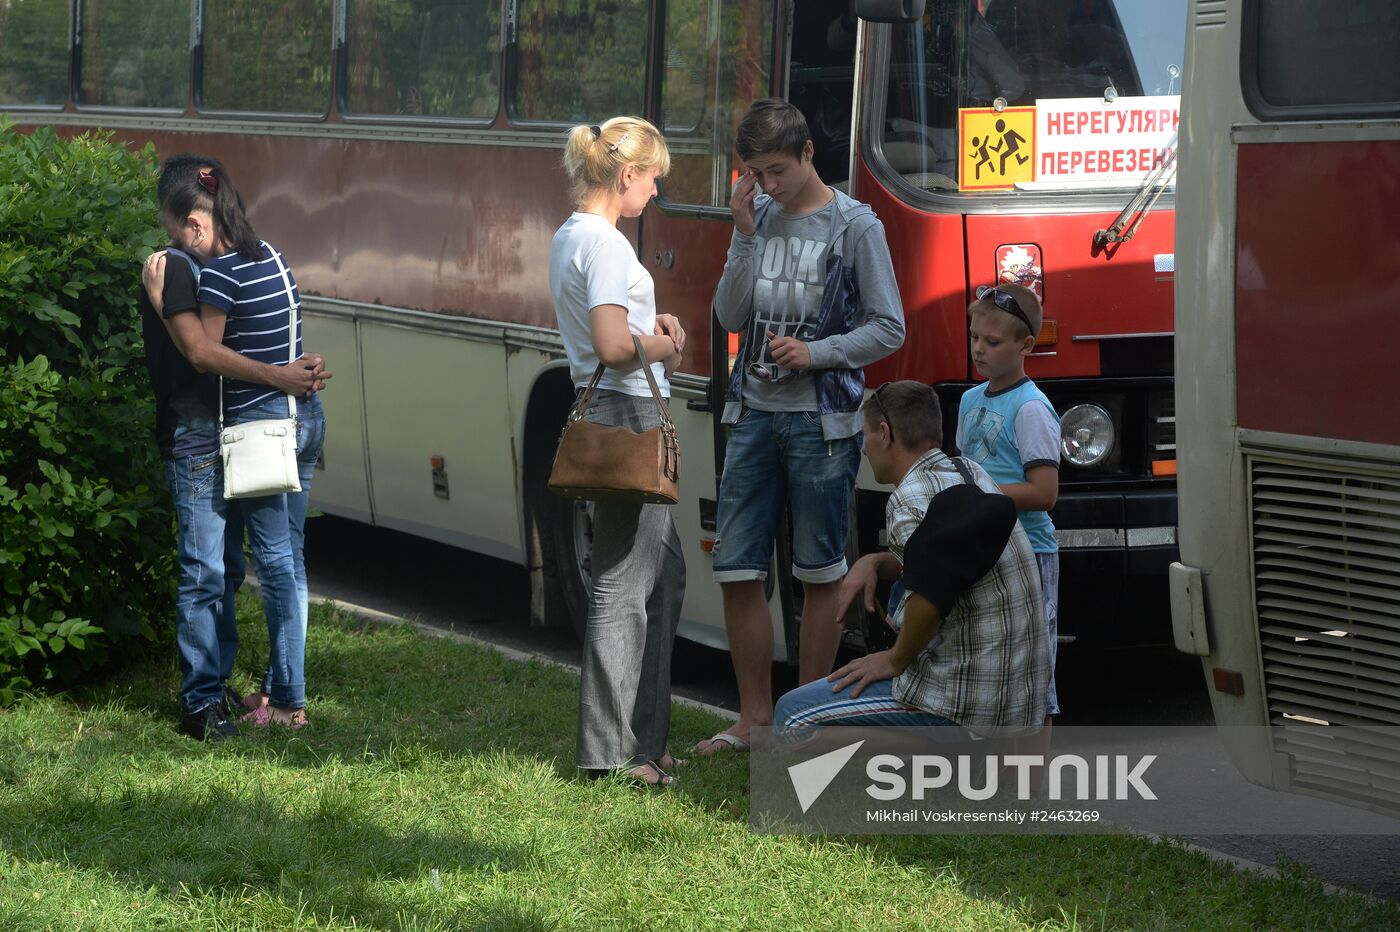 Another group of refugees from Donetsk escaping to Russia